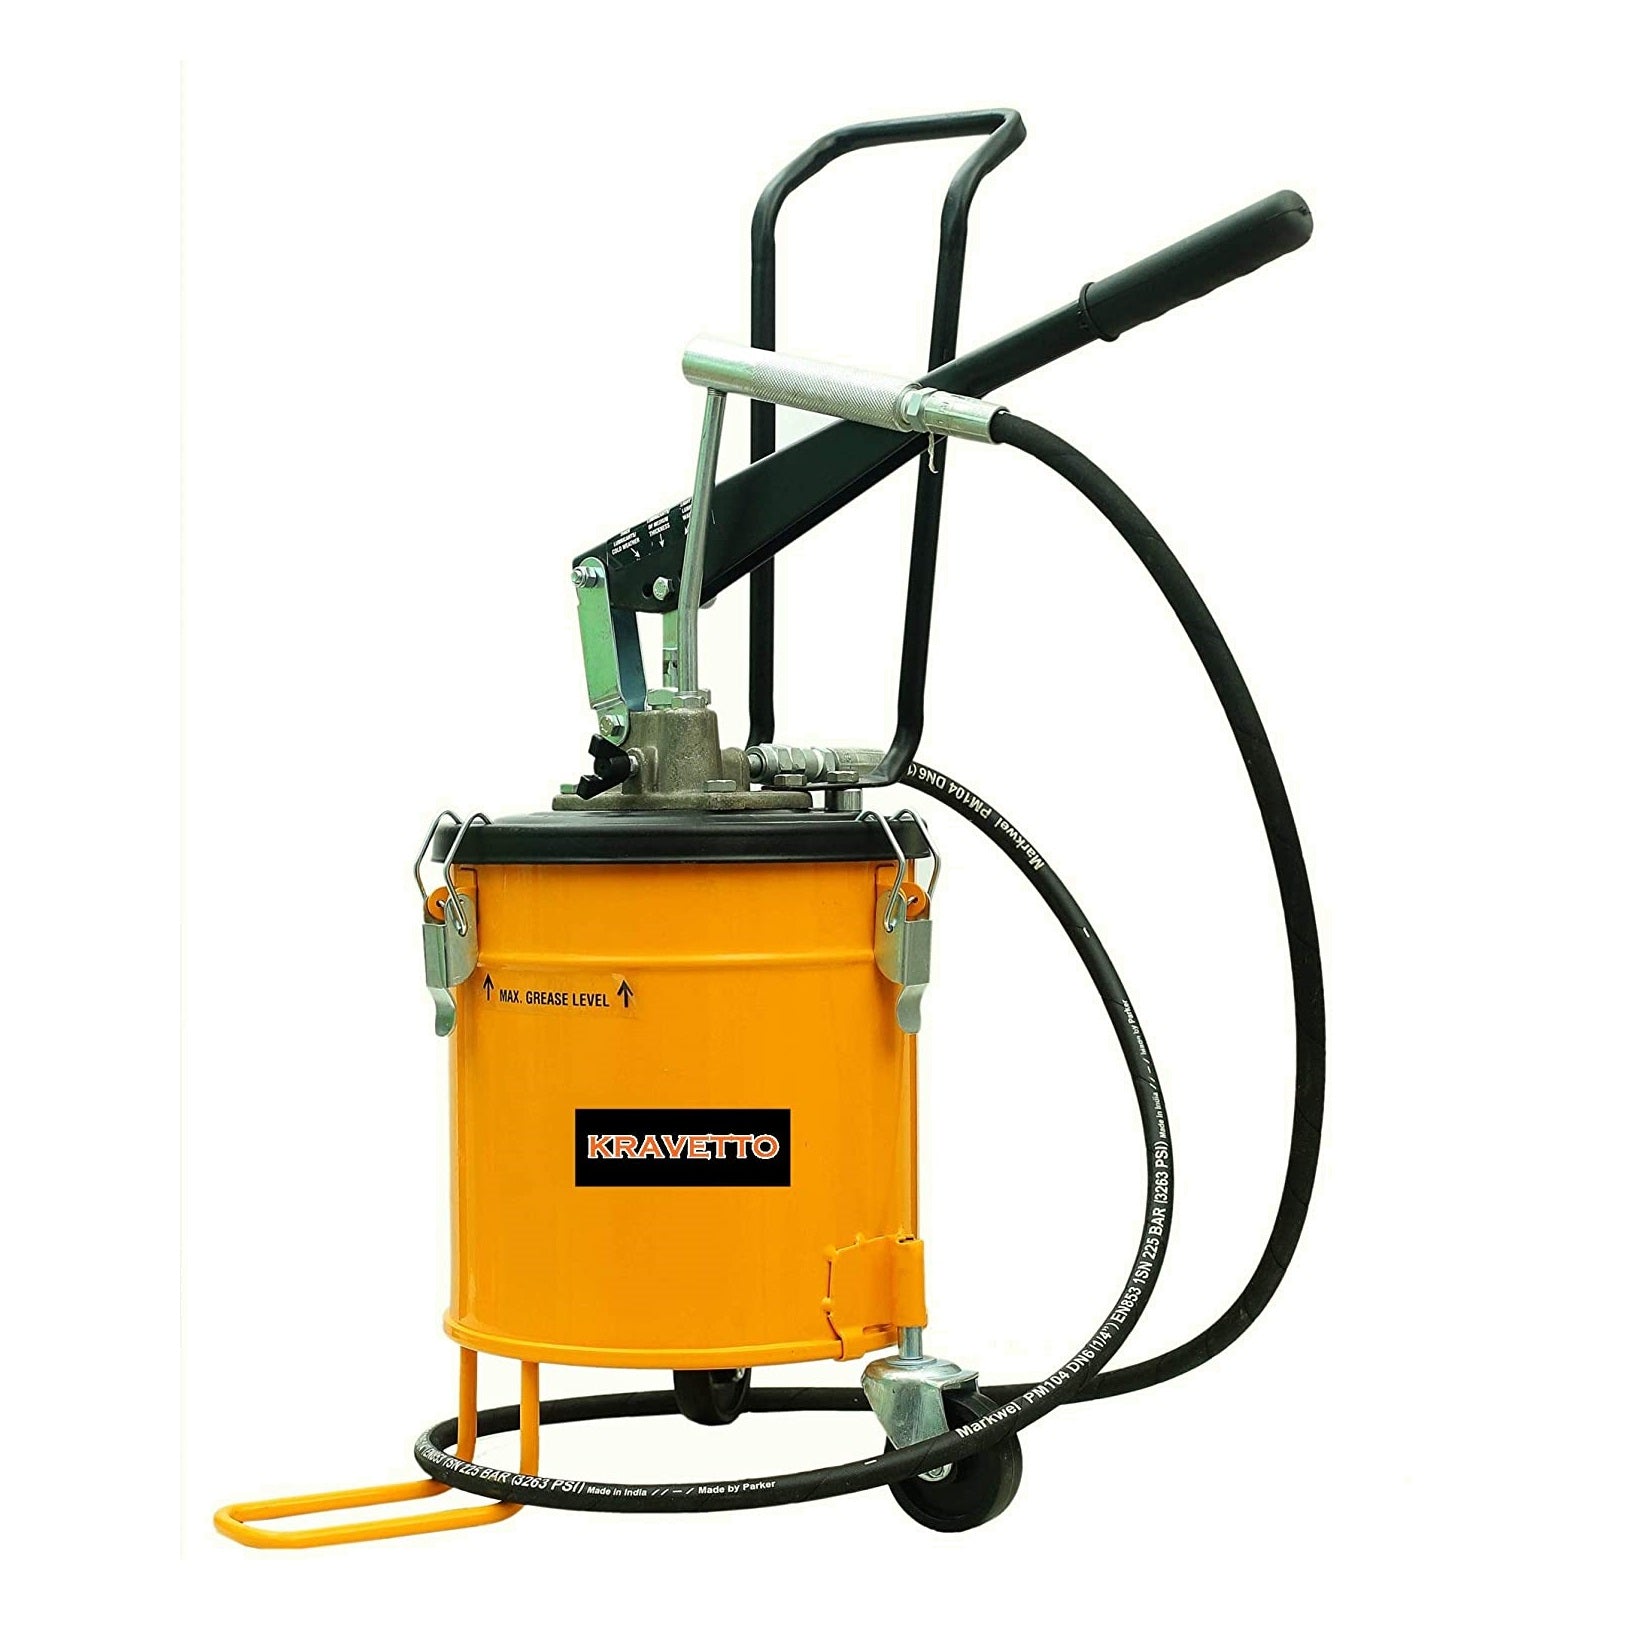 Kravetto Bucket Grease Pump with Wheels